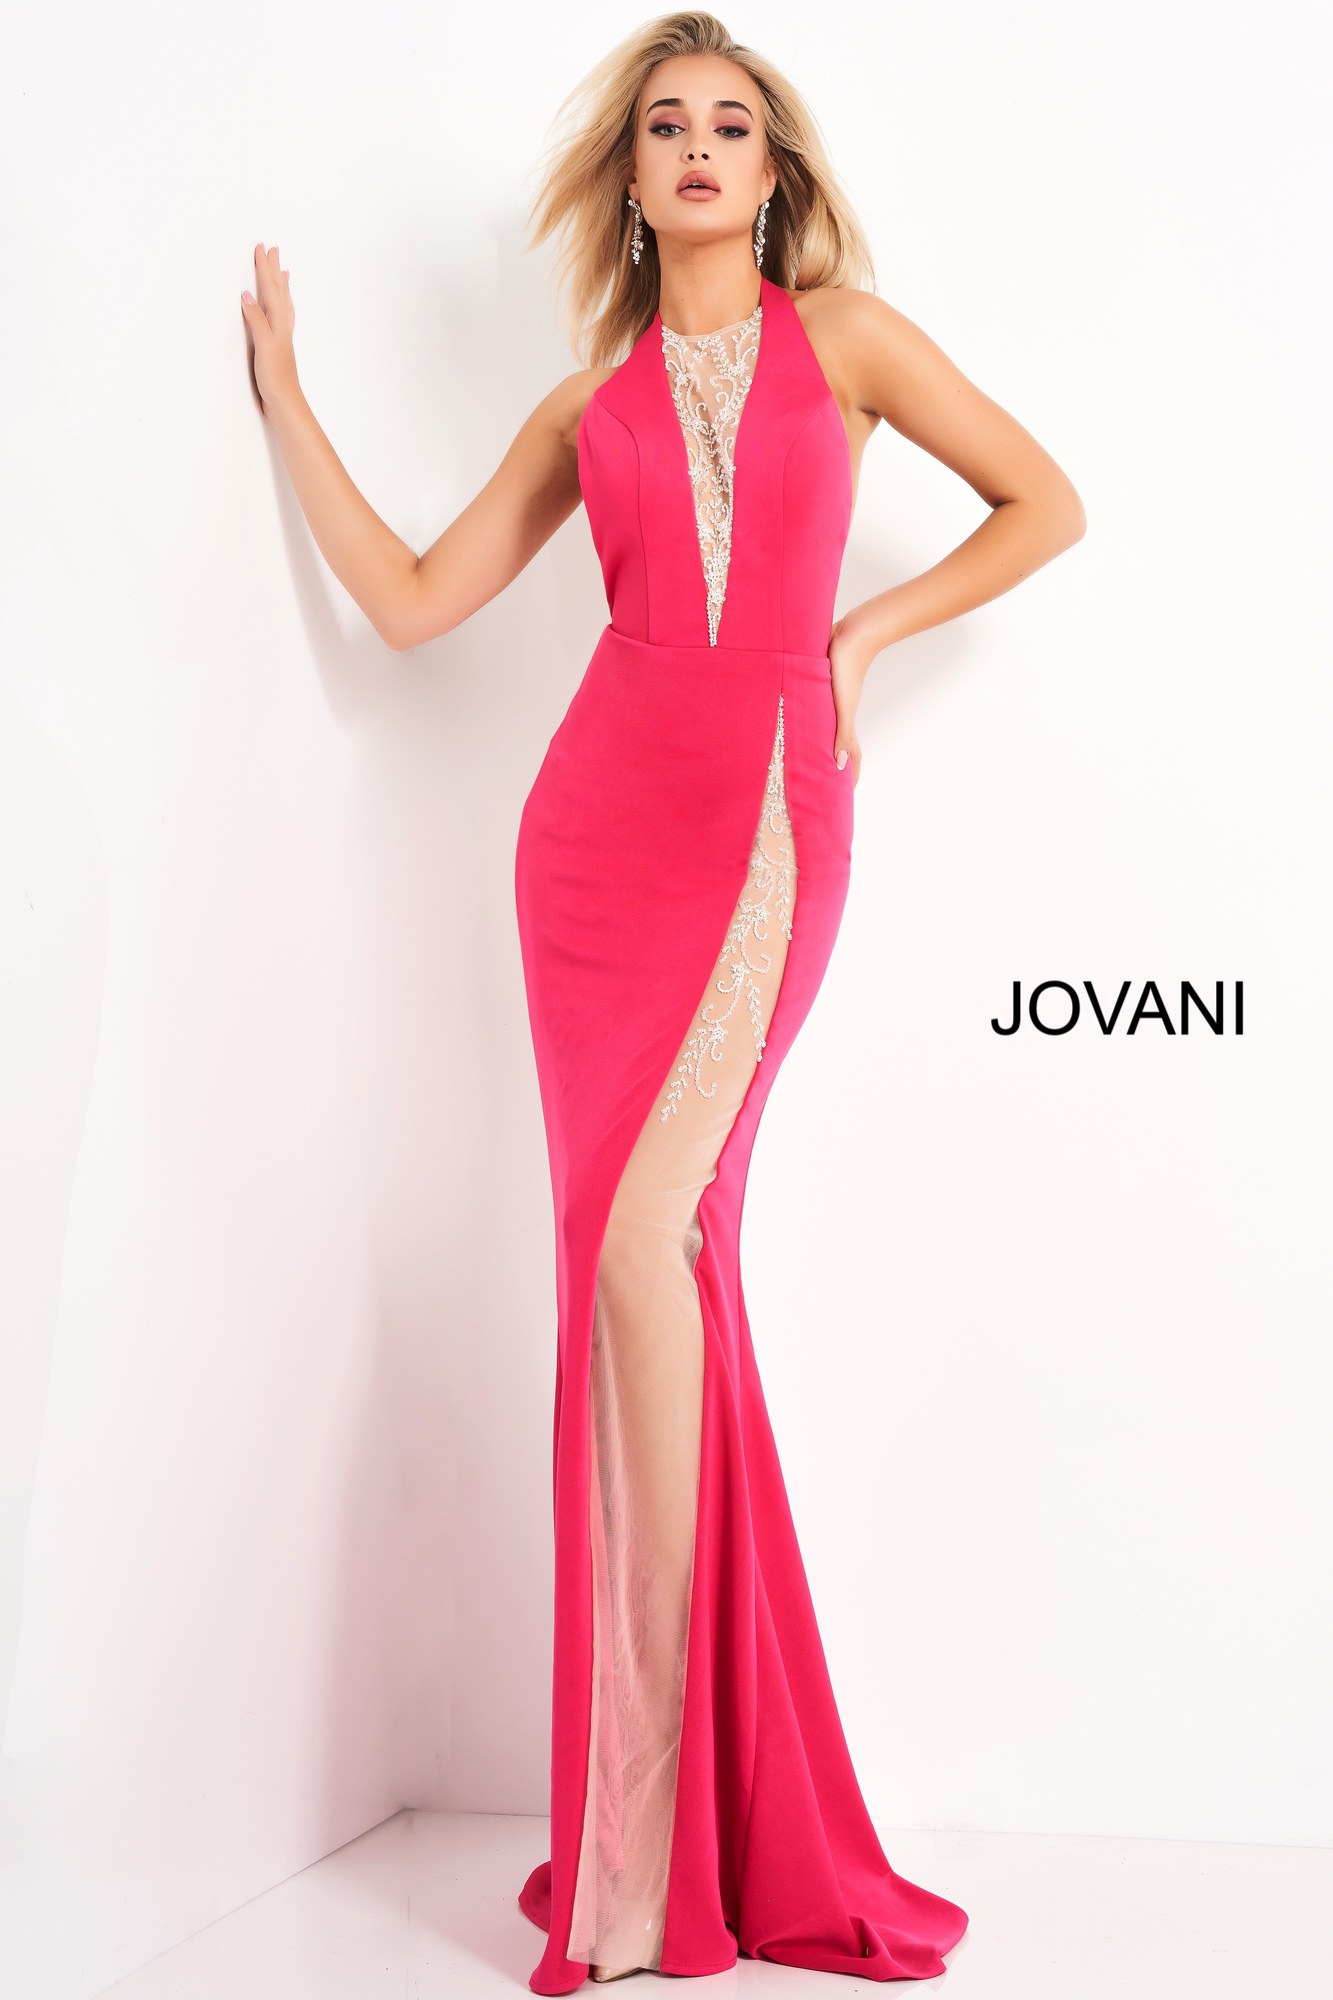 Jovani Hot Pink Halter Neck Backless Prom Dress Free Hot Nude Porn Pic Gallery